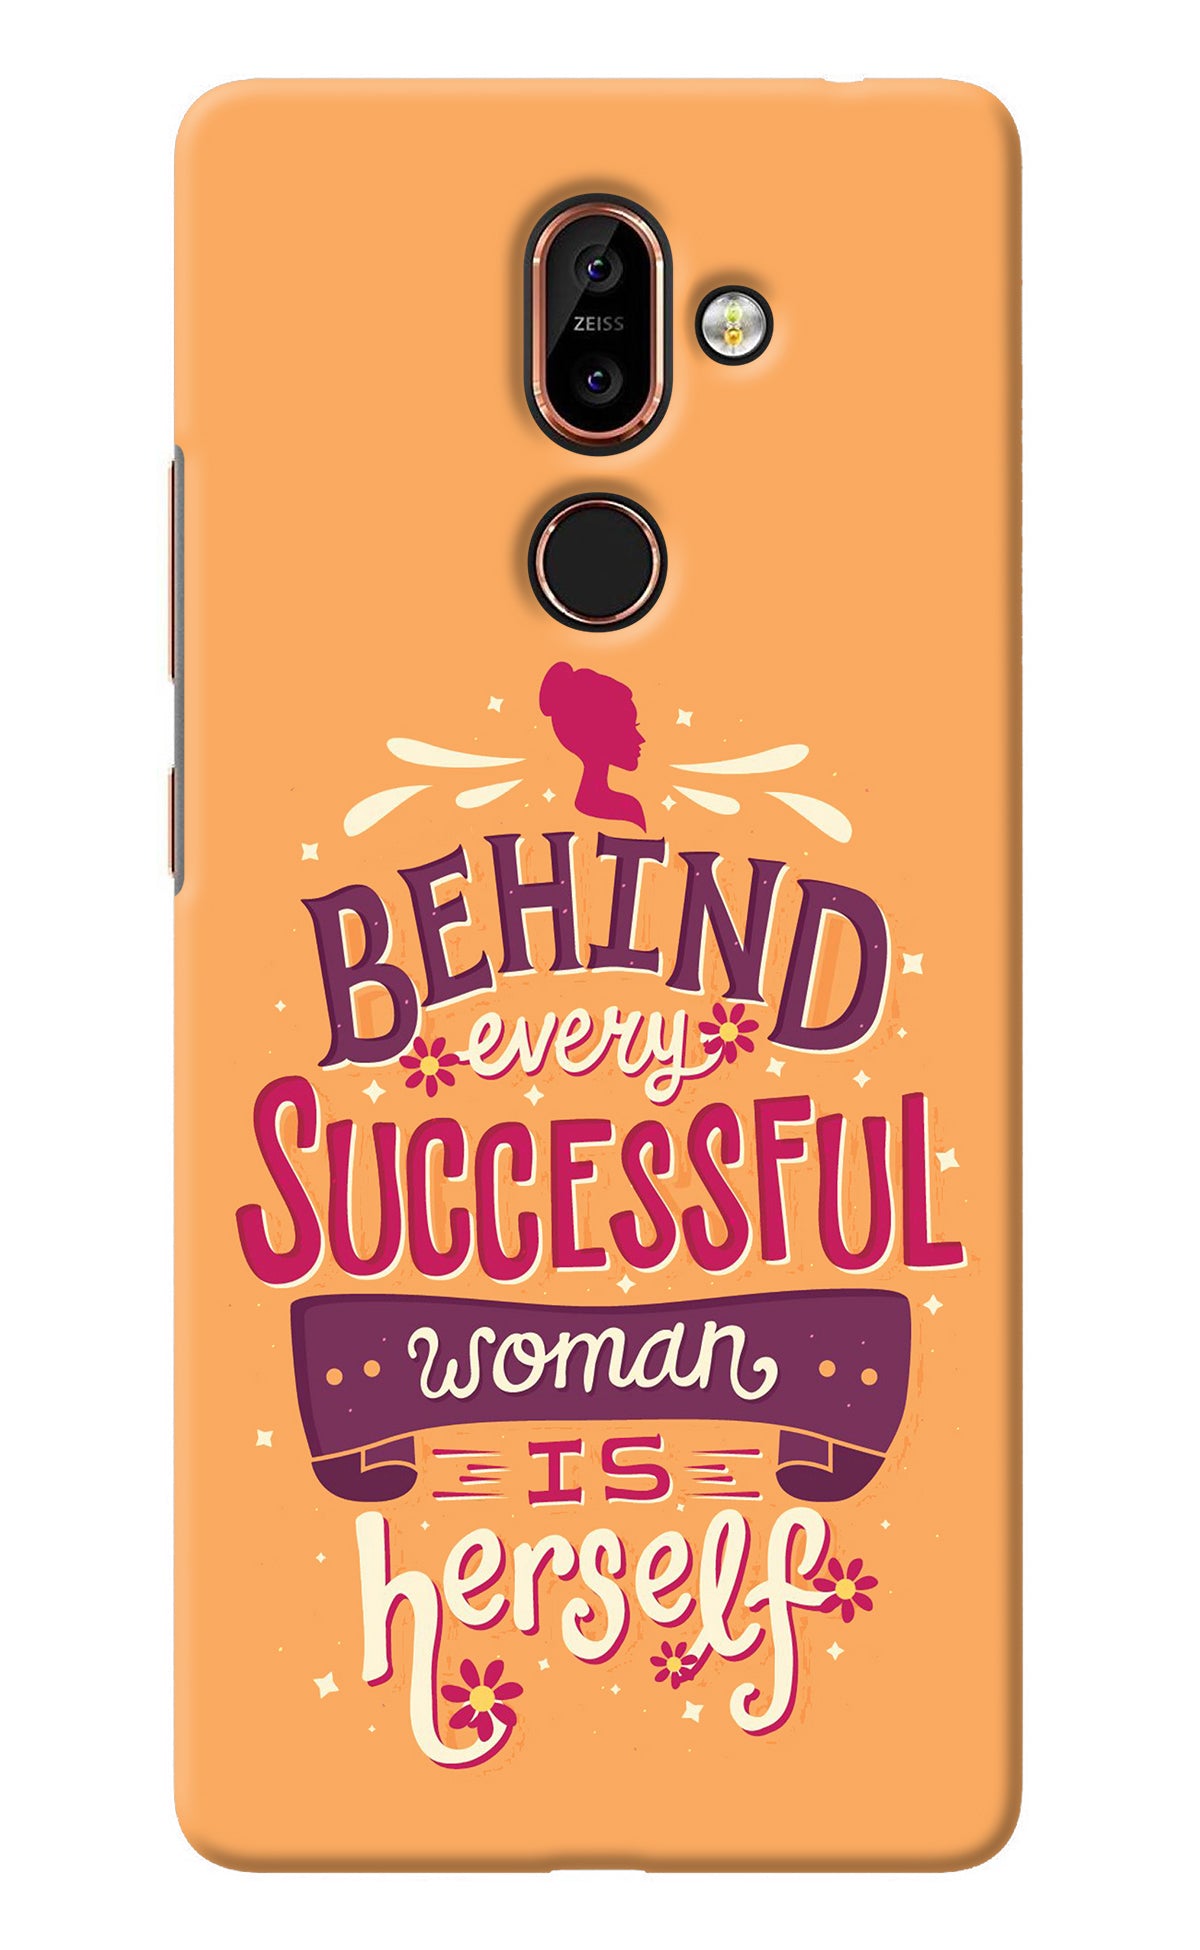 Behind Every Successful Woman There Is Herself Nokia 7 Plus Back Cover